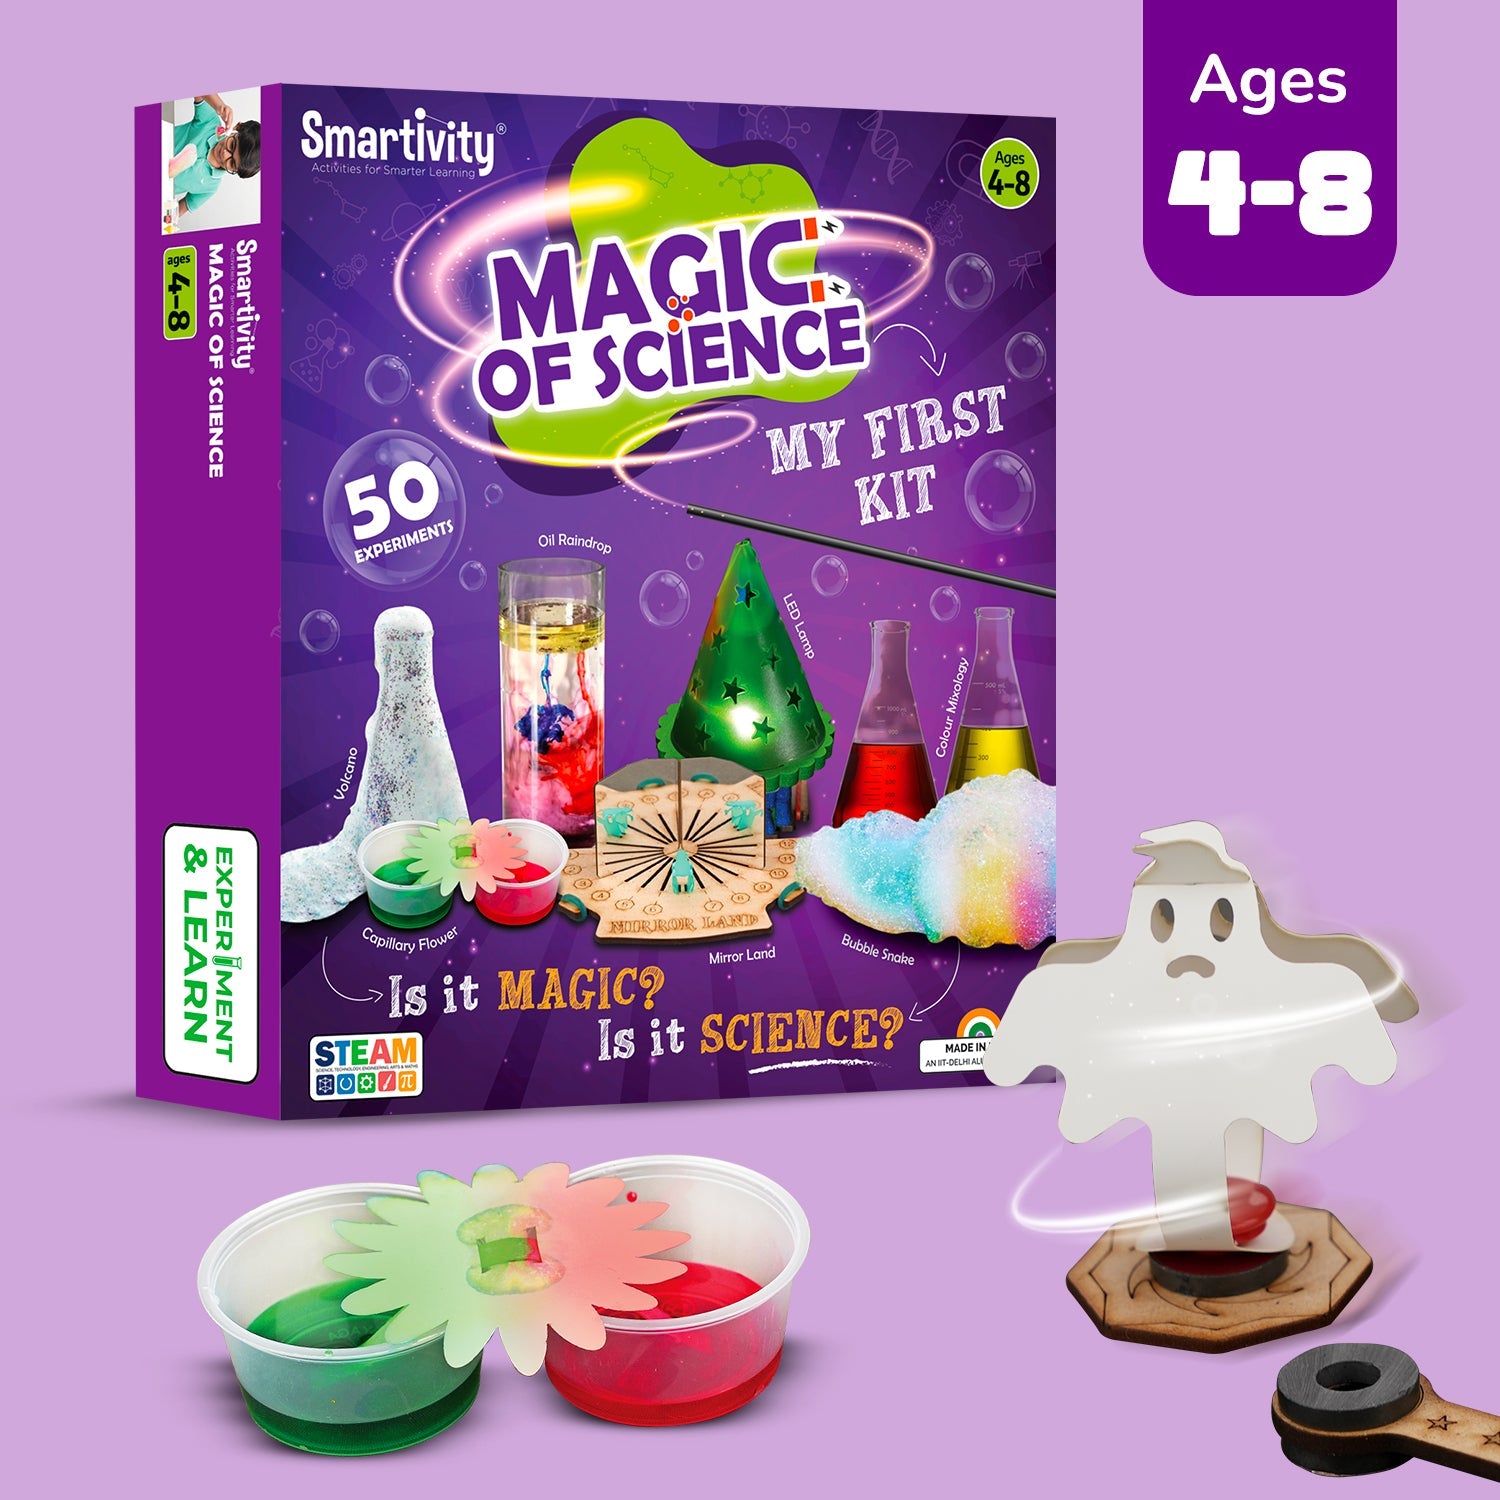 Smartivity Magic of Science Experiment Kit for Boys & Girls Age 4-6-8, Birthday Gift for Kids Age 4-8, Kids Safe Physics & Chemistry Kit, STEM  Educational Fun Toys